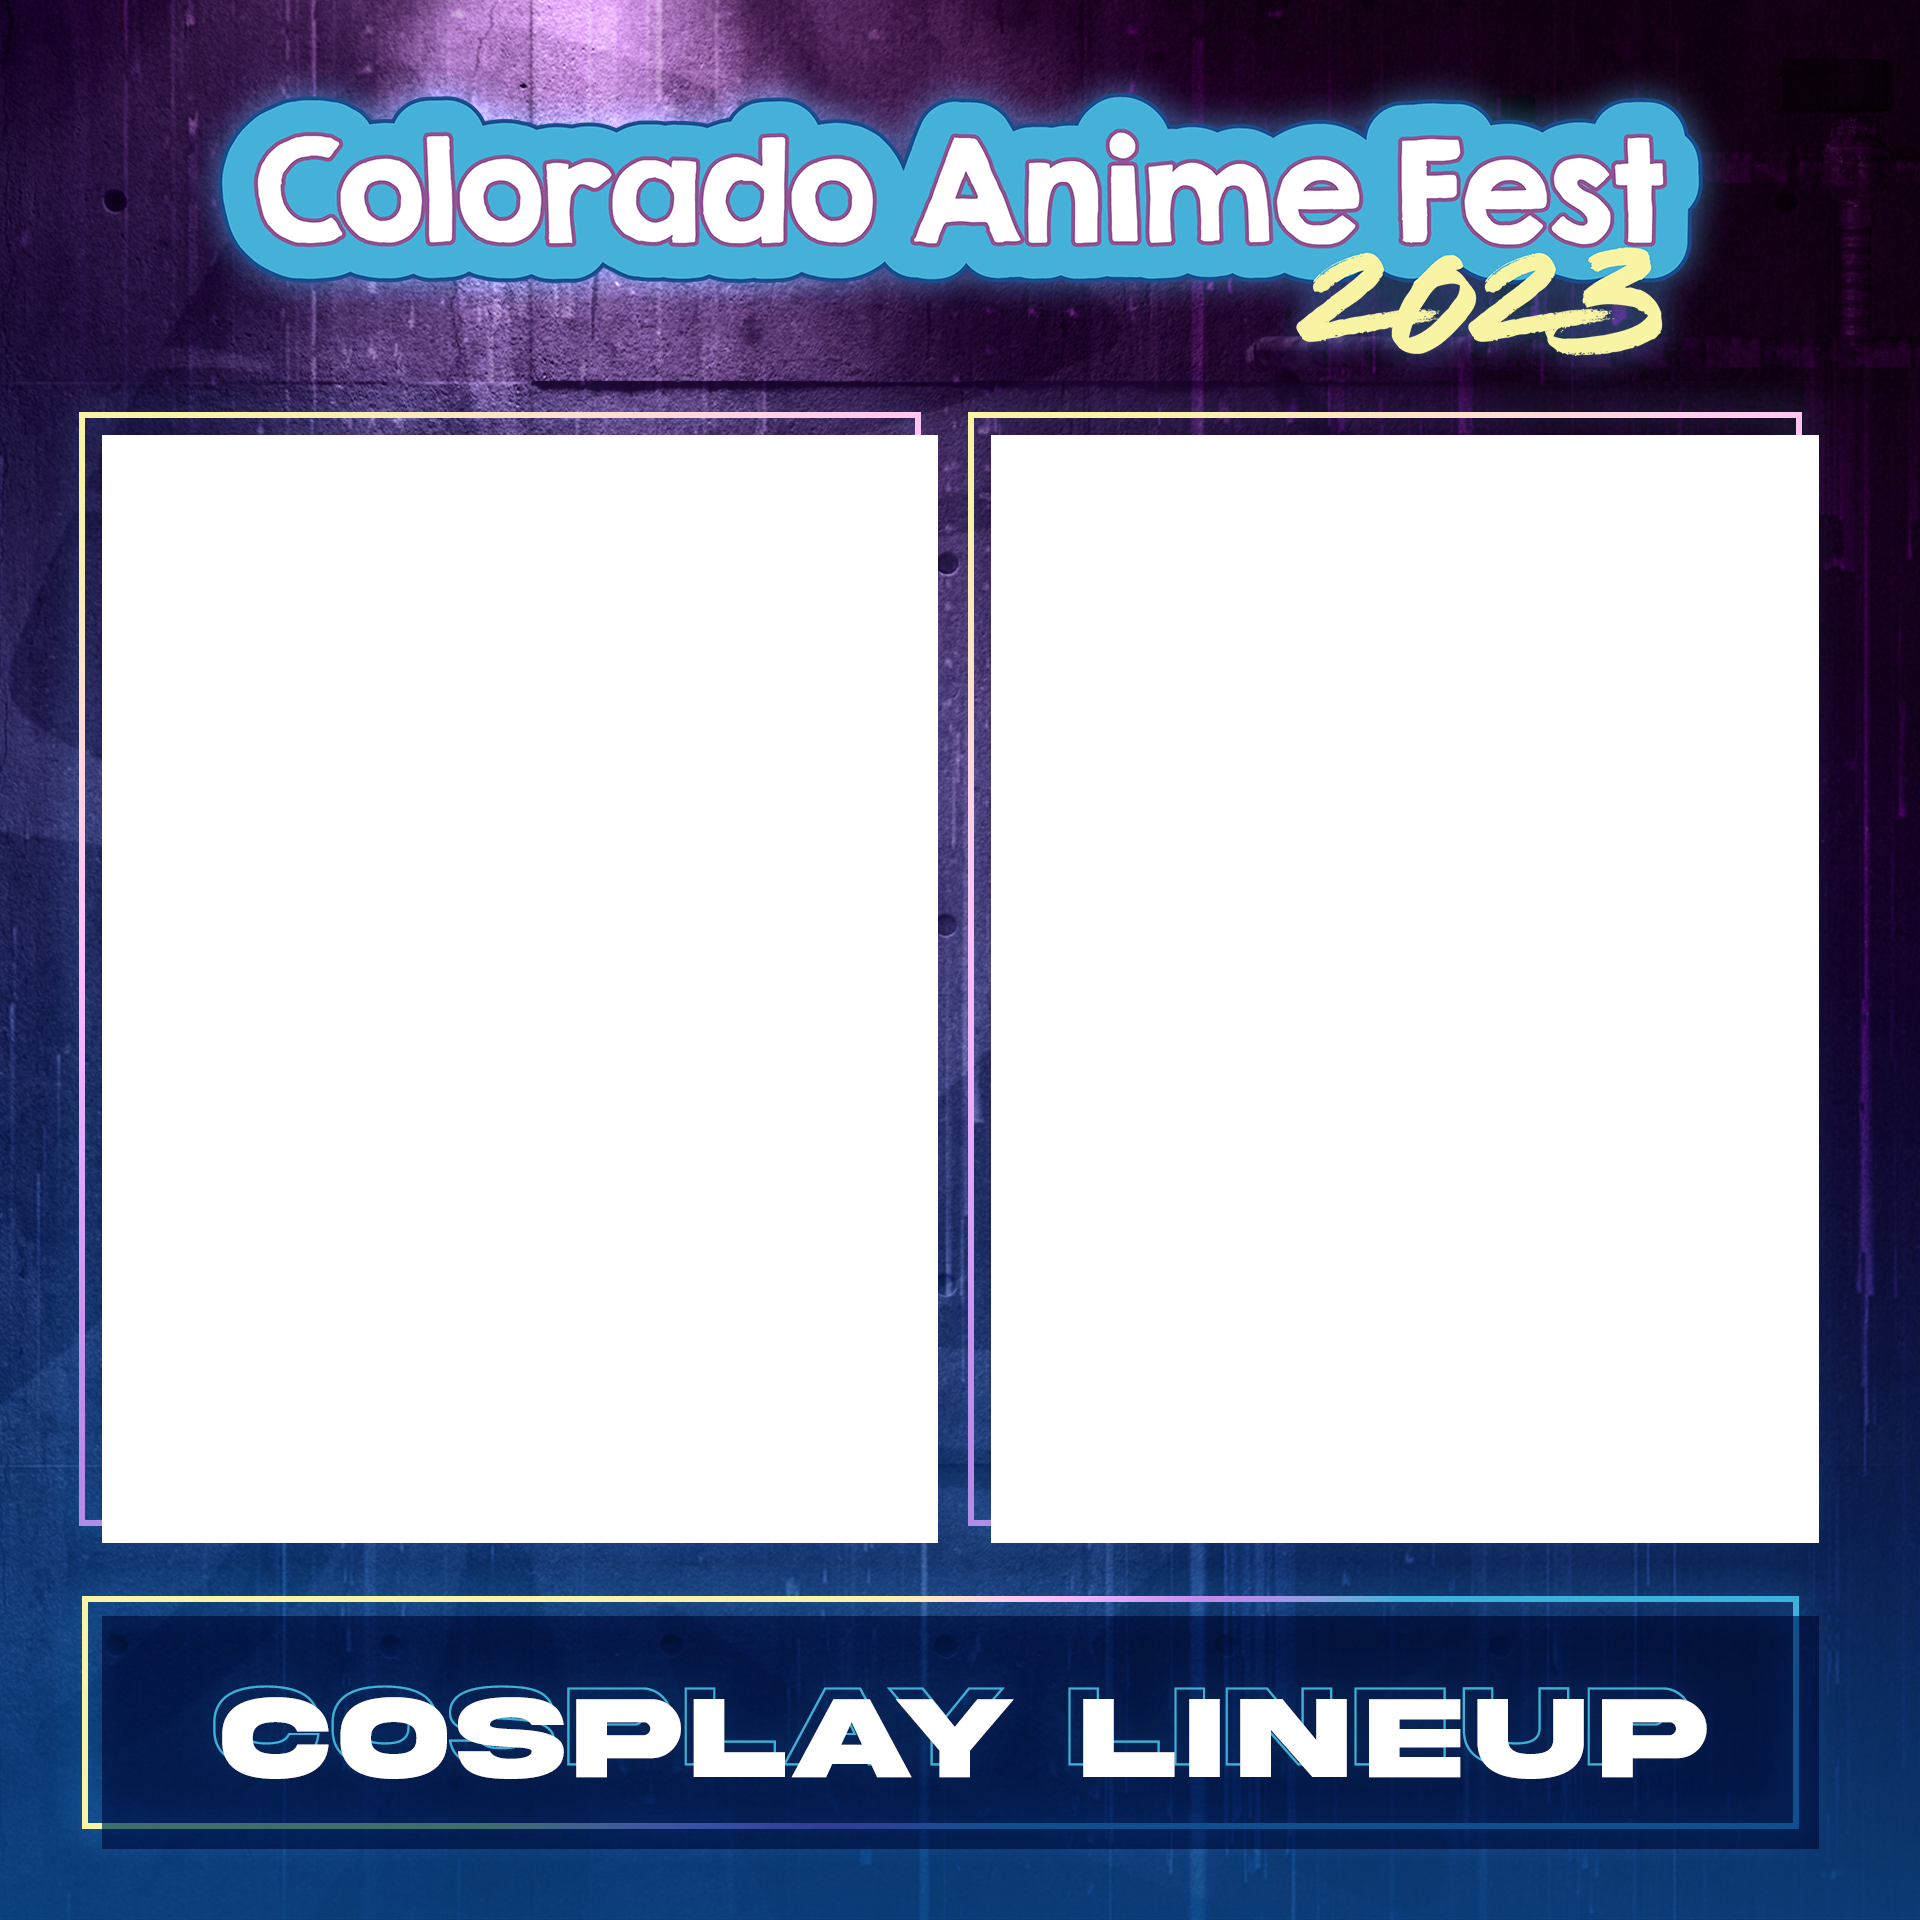 COAF_2023_Cosplay_Lineup_2BOX.png